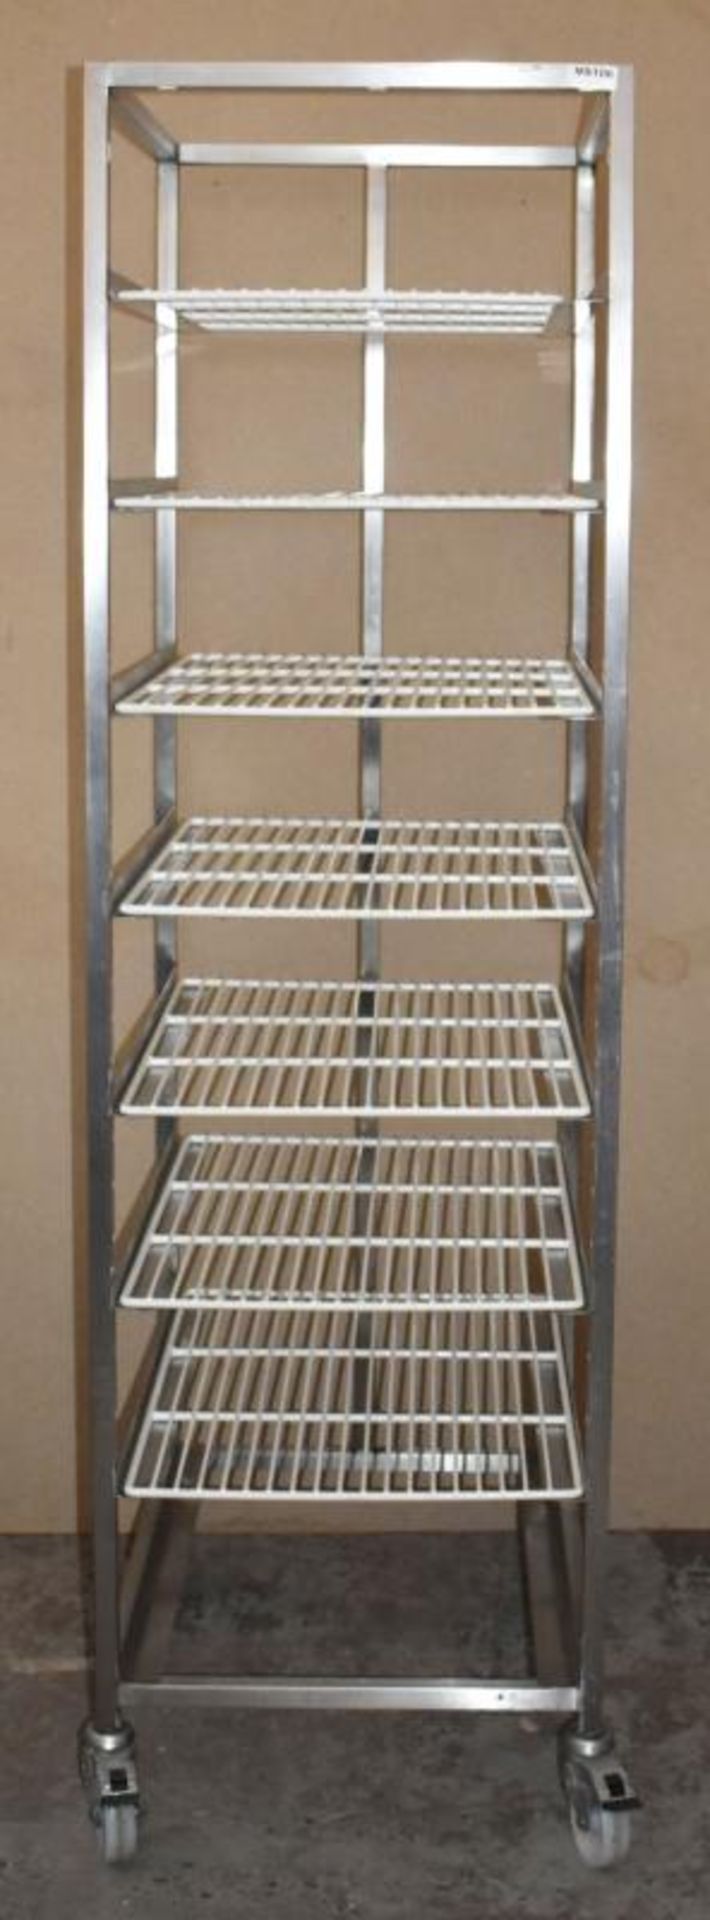 1 x Stainless Steel 8 Tier Mobile Shelf Unit For Commercial Kitchens With White Coated Wire Shelves - Image 2 of 11